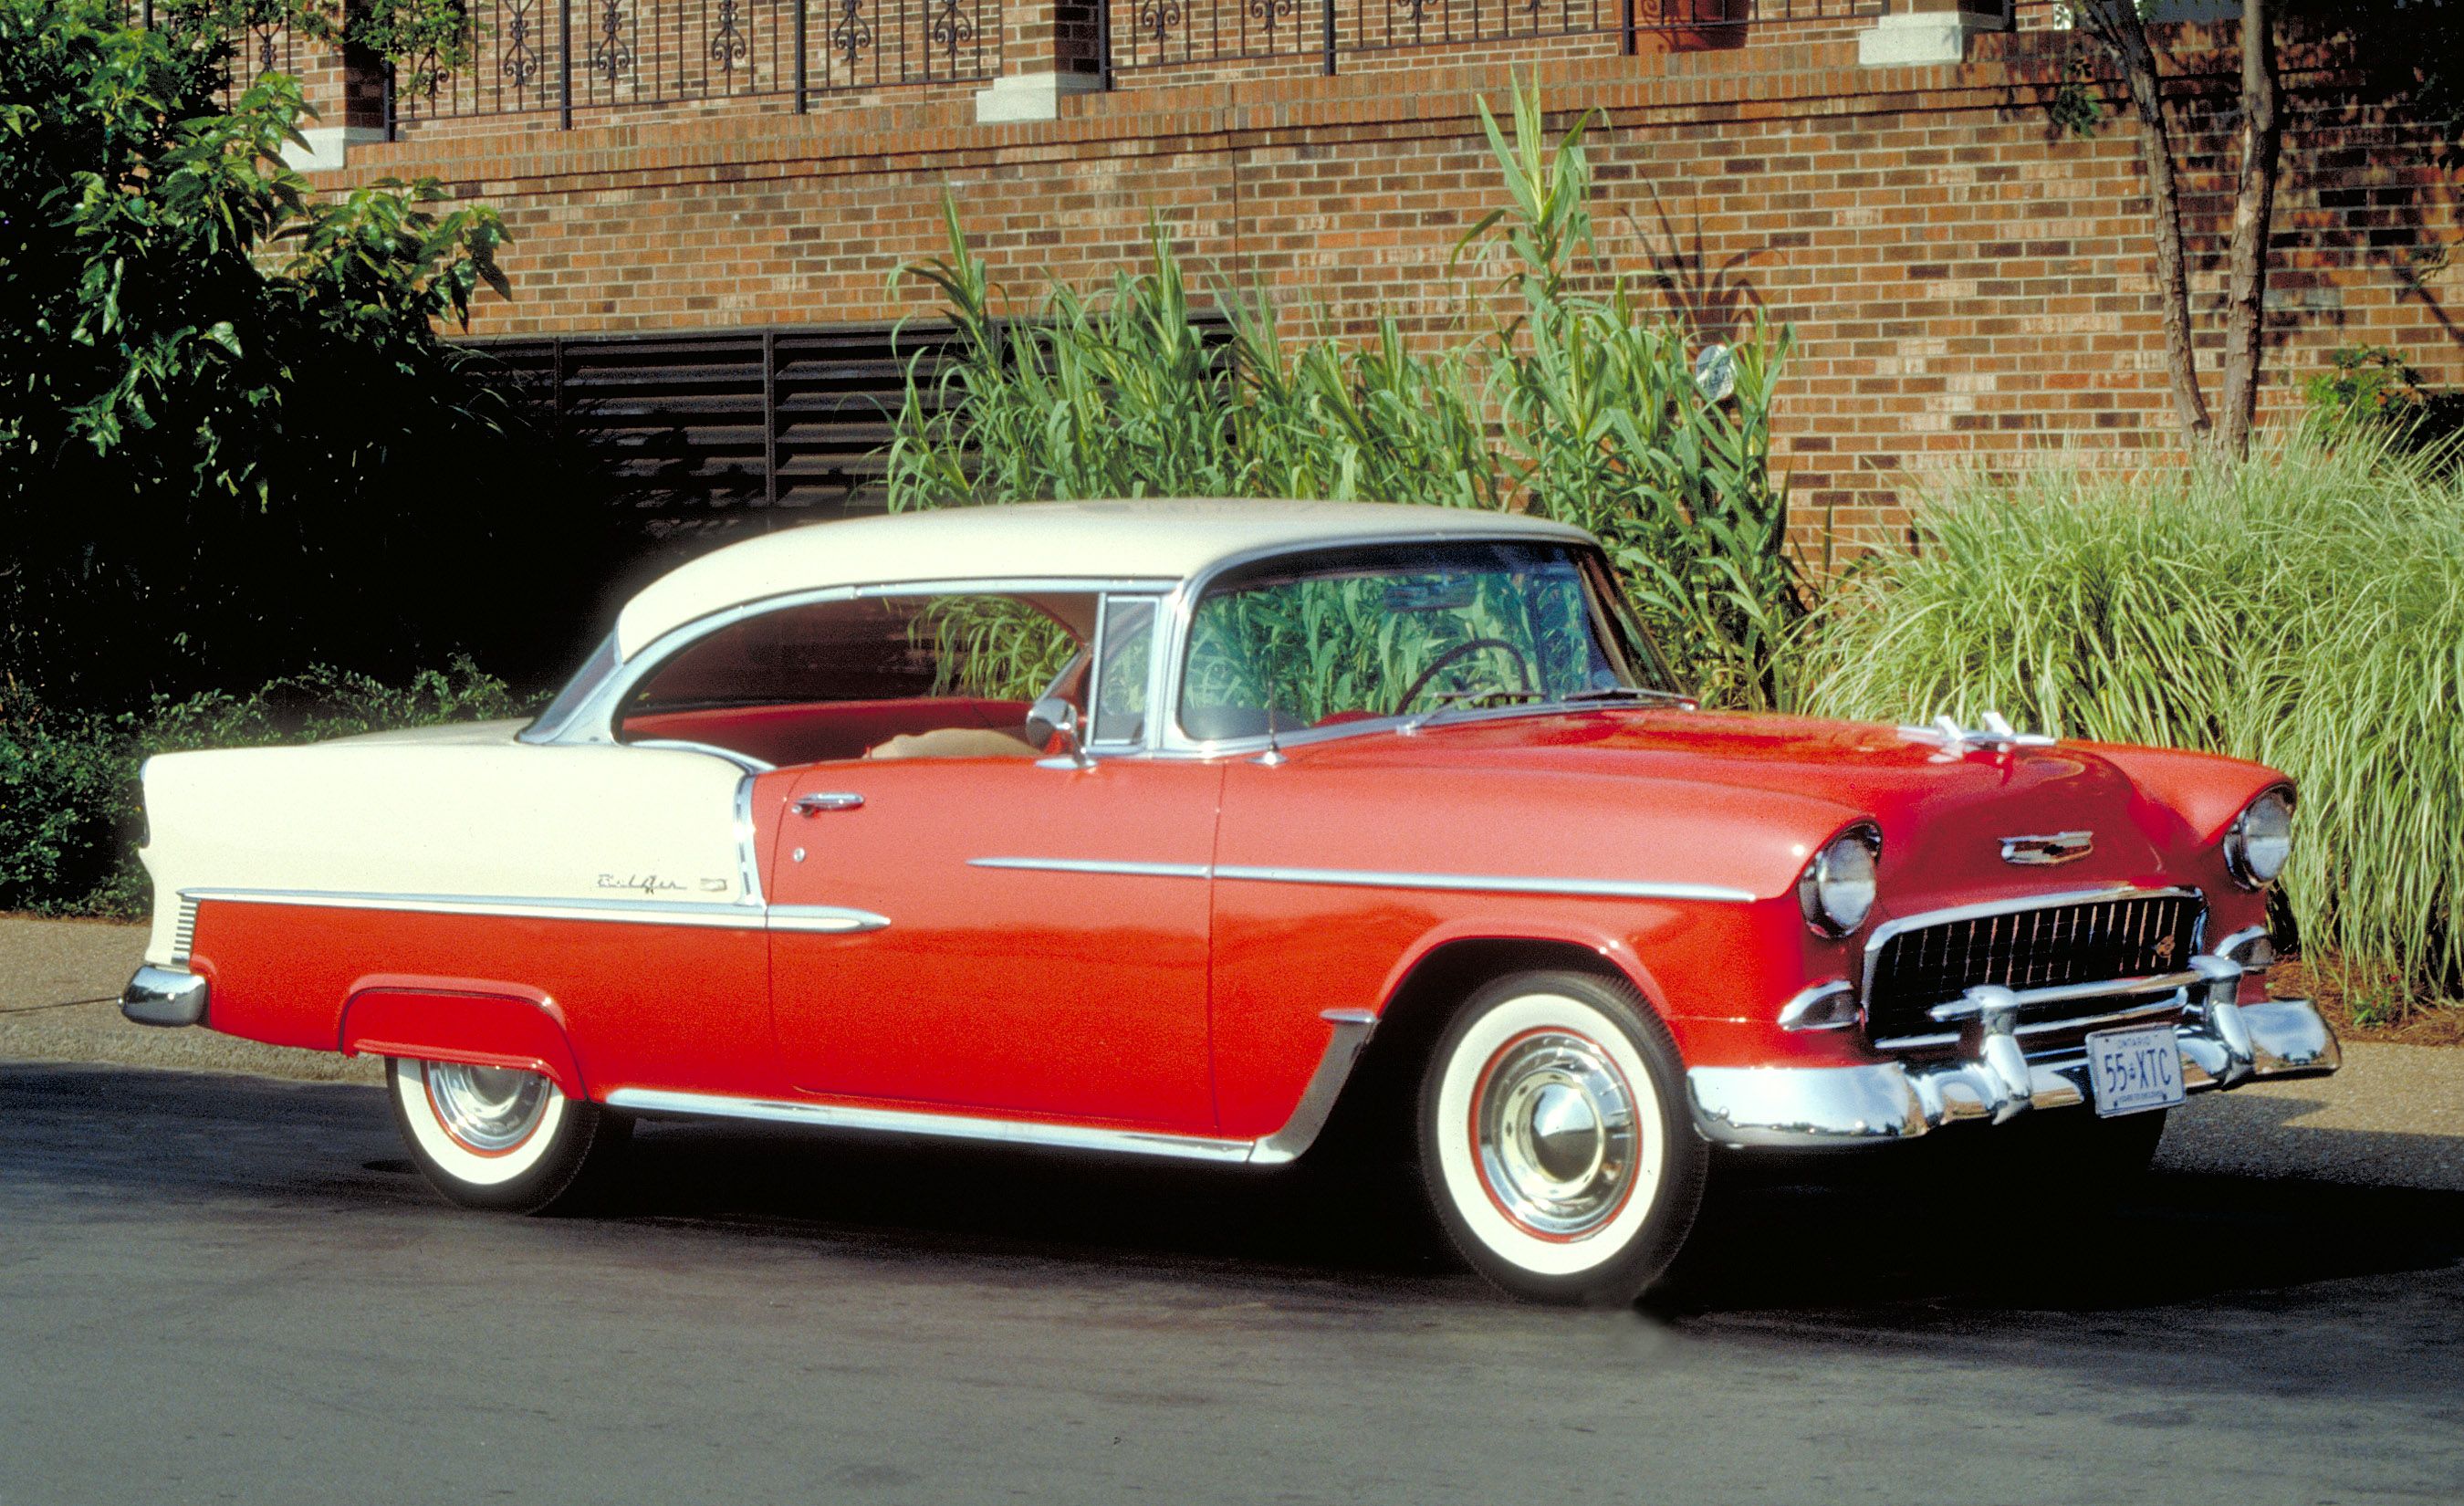 A red Chevy Bel Air